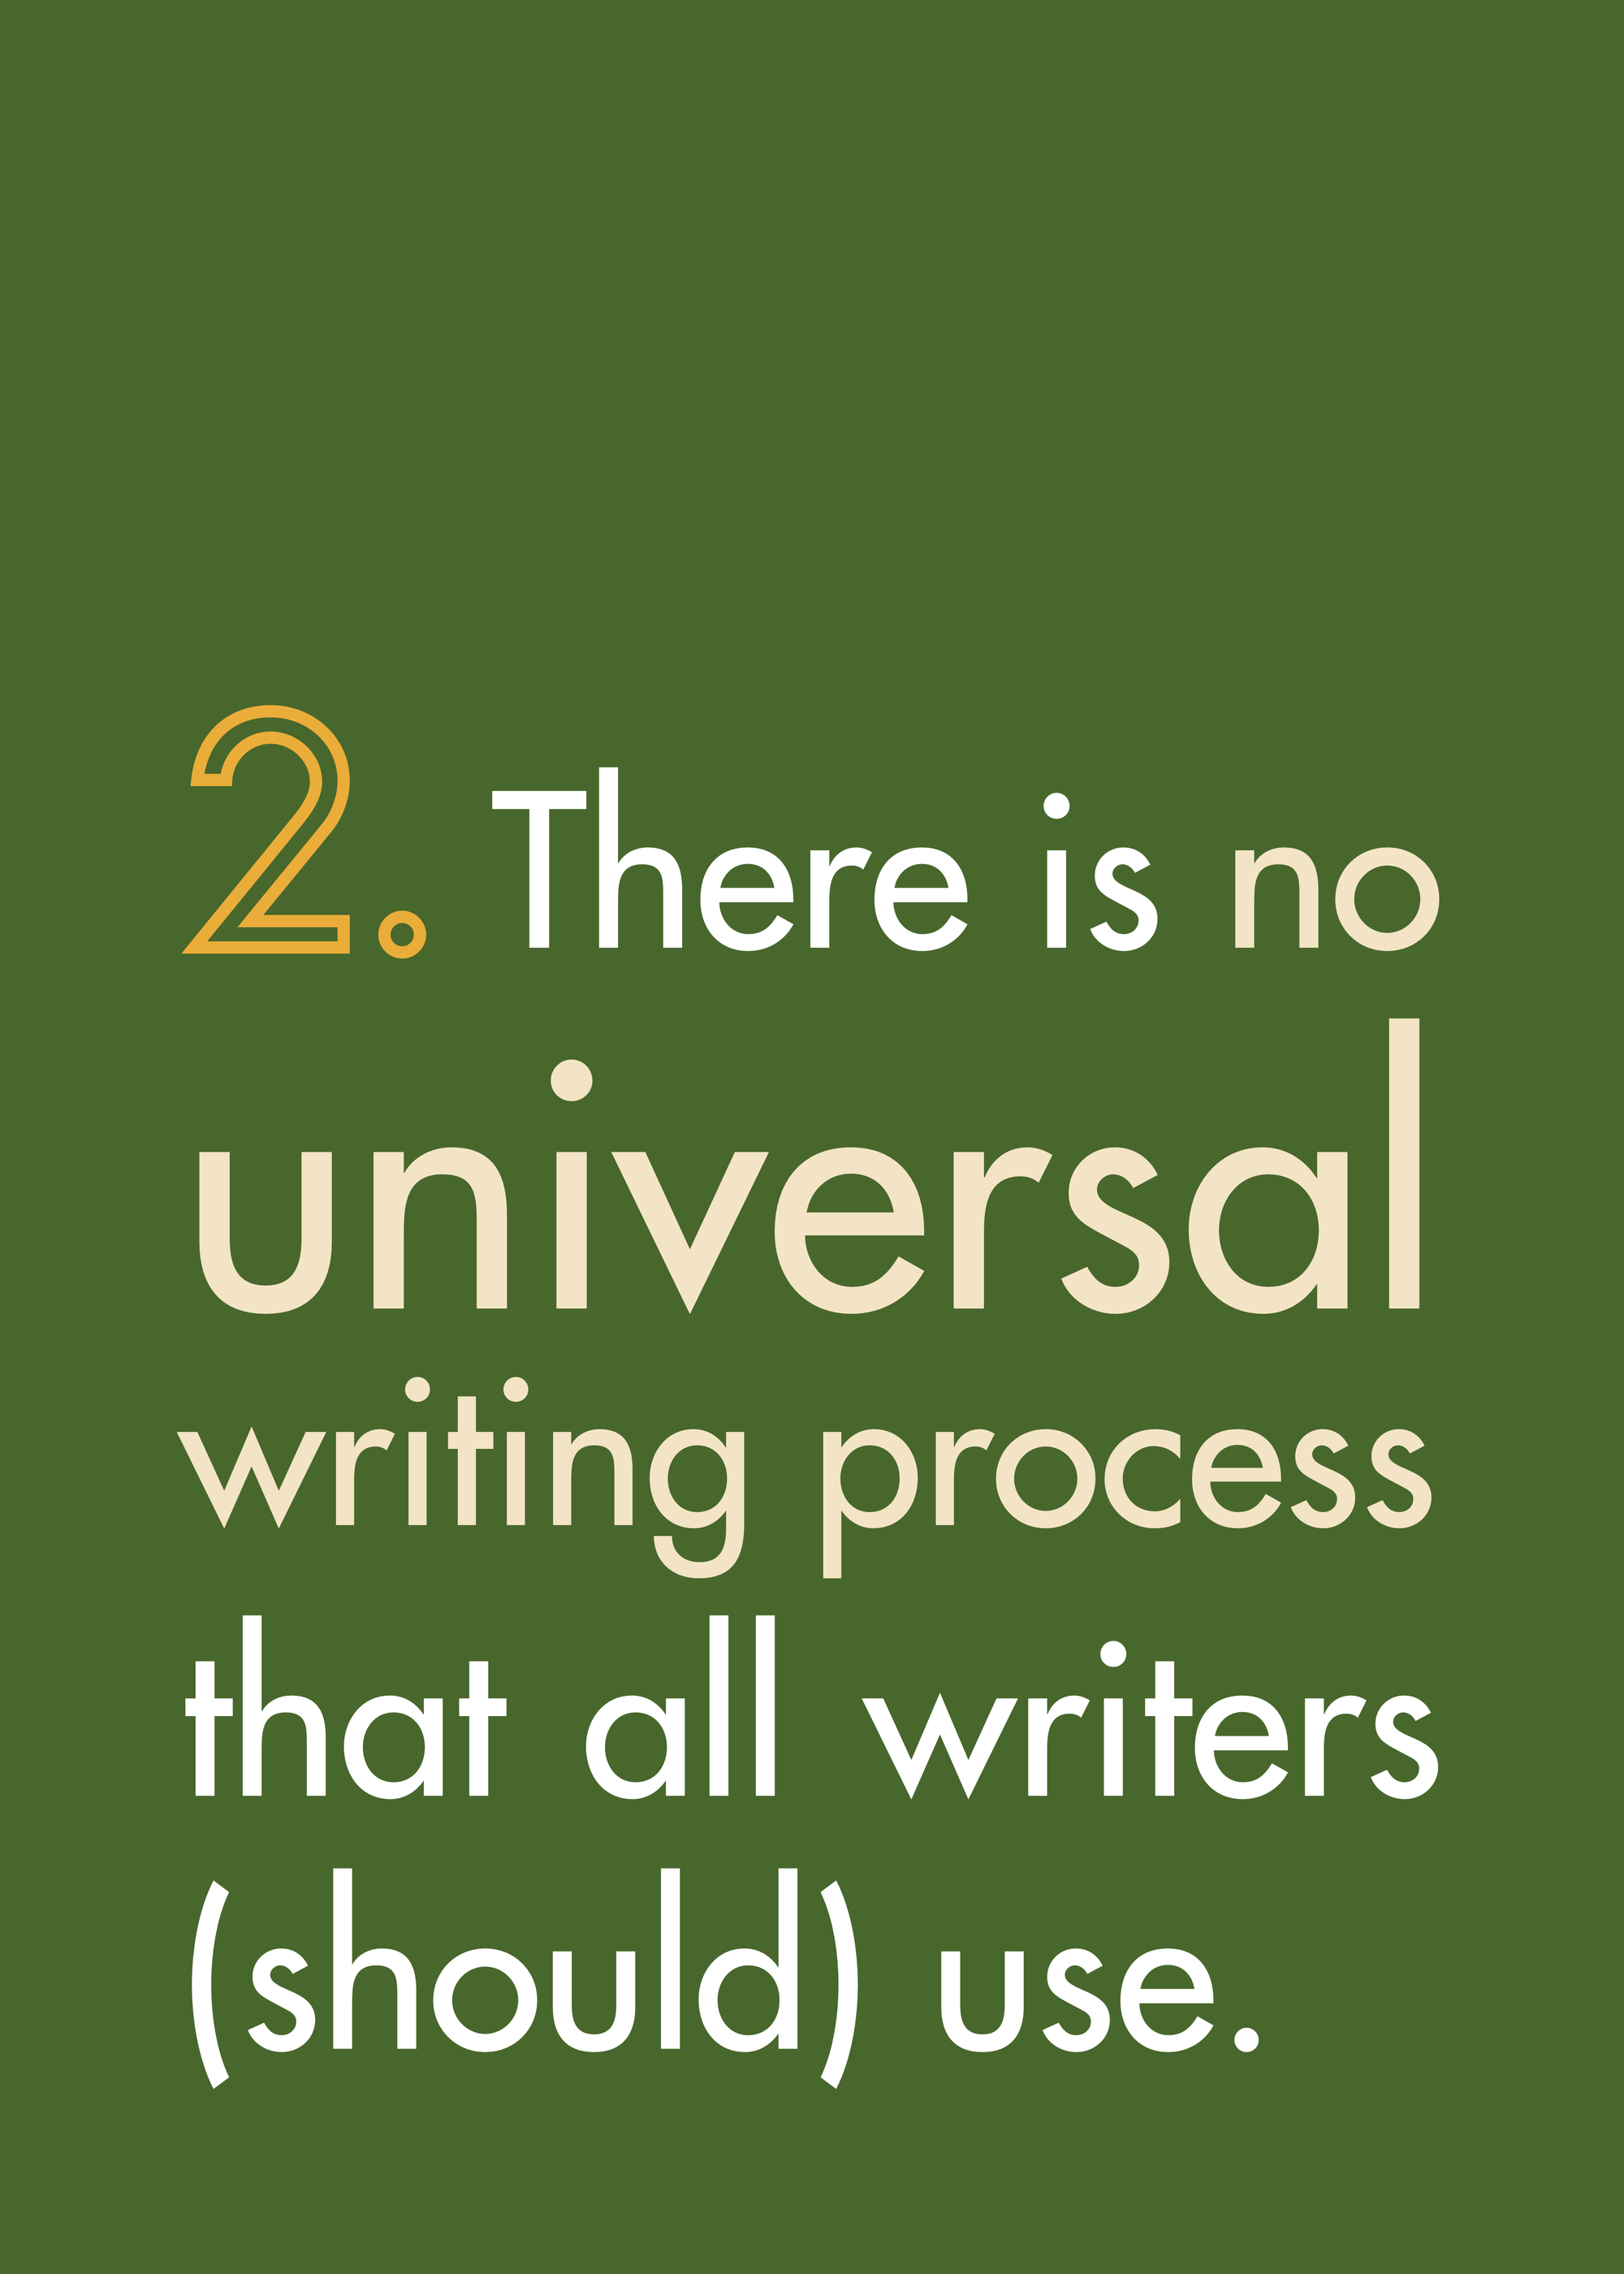 2. There is no universal writing process that all writers (should) use